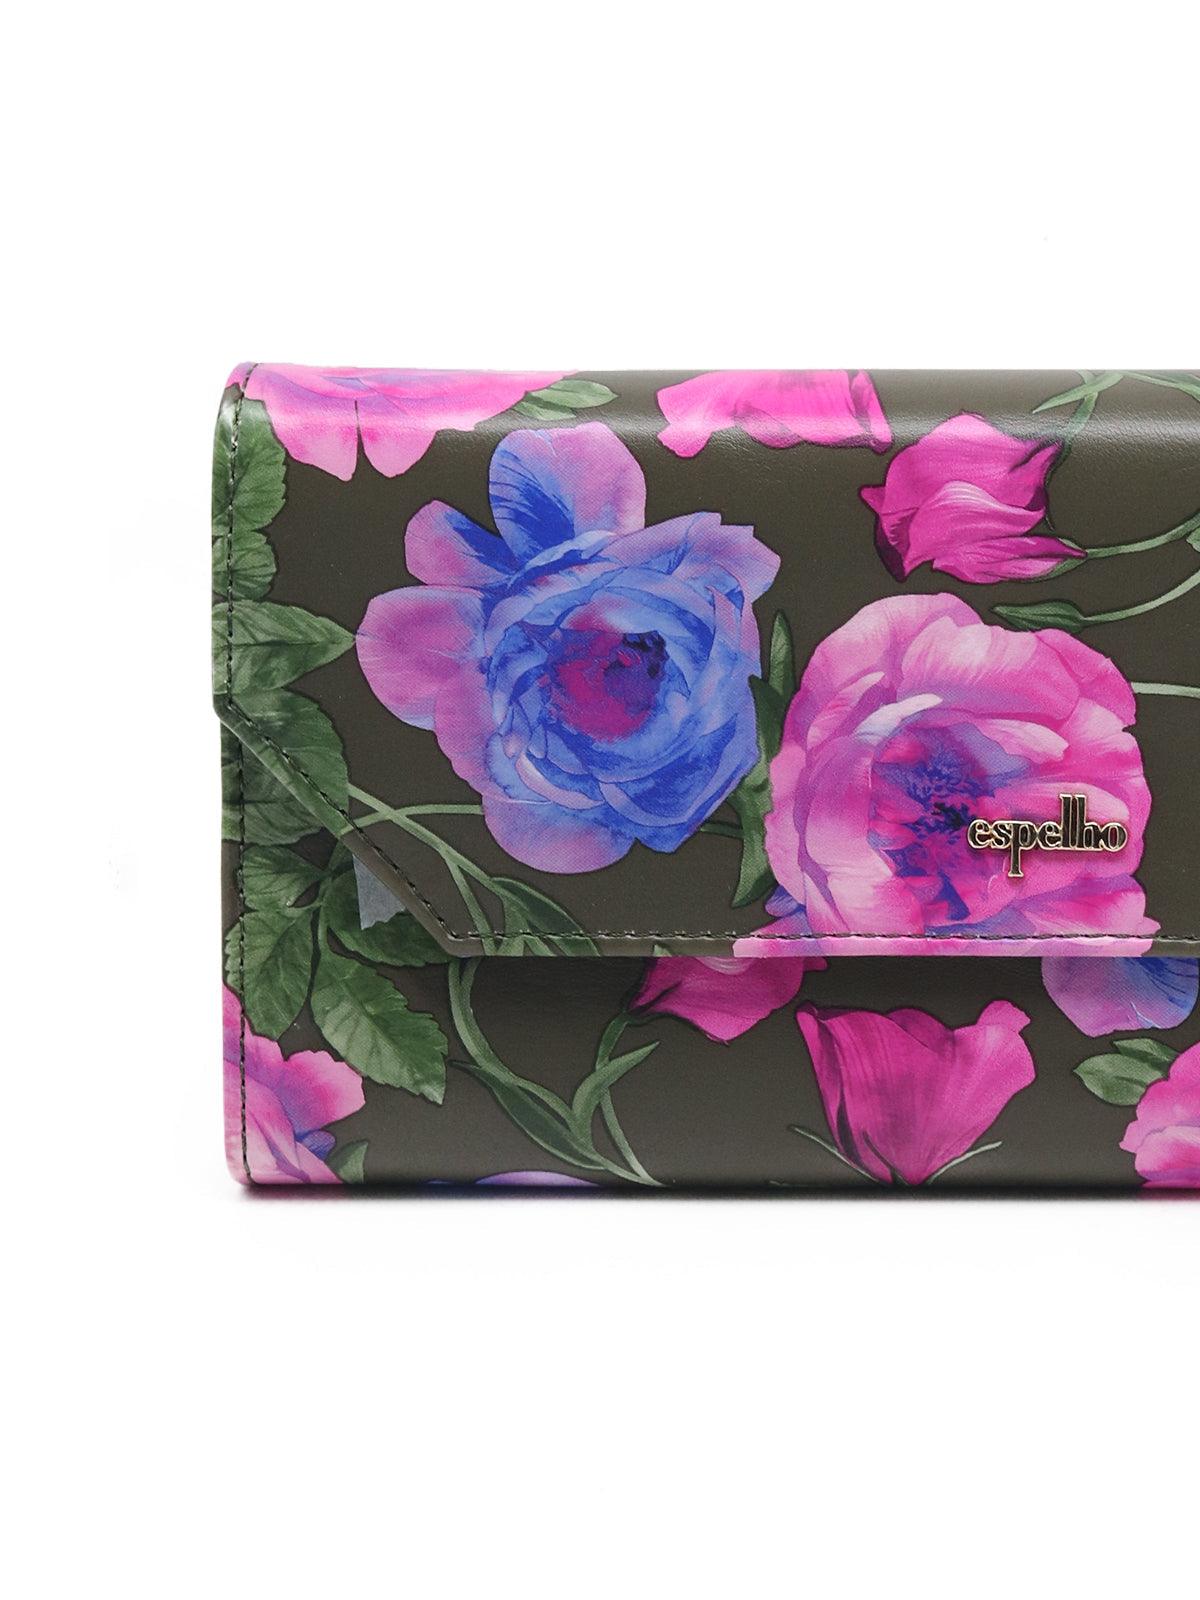 Typical Green and Pink Floral Rectangular Wome's Wallet! - Odette